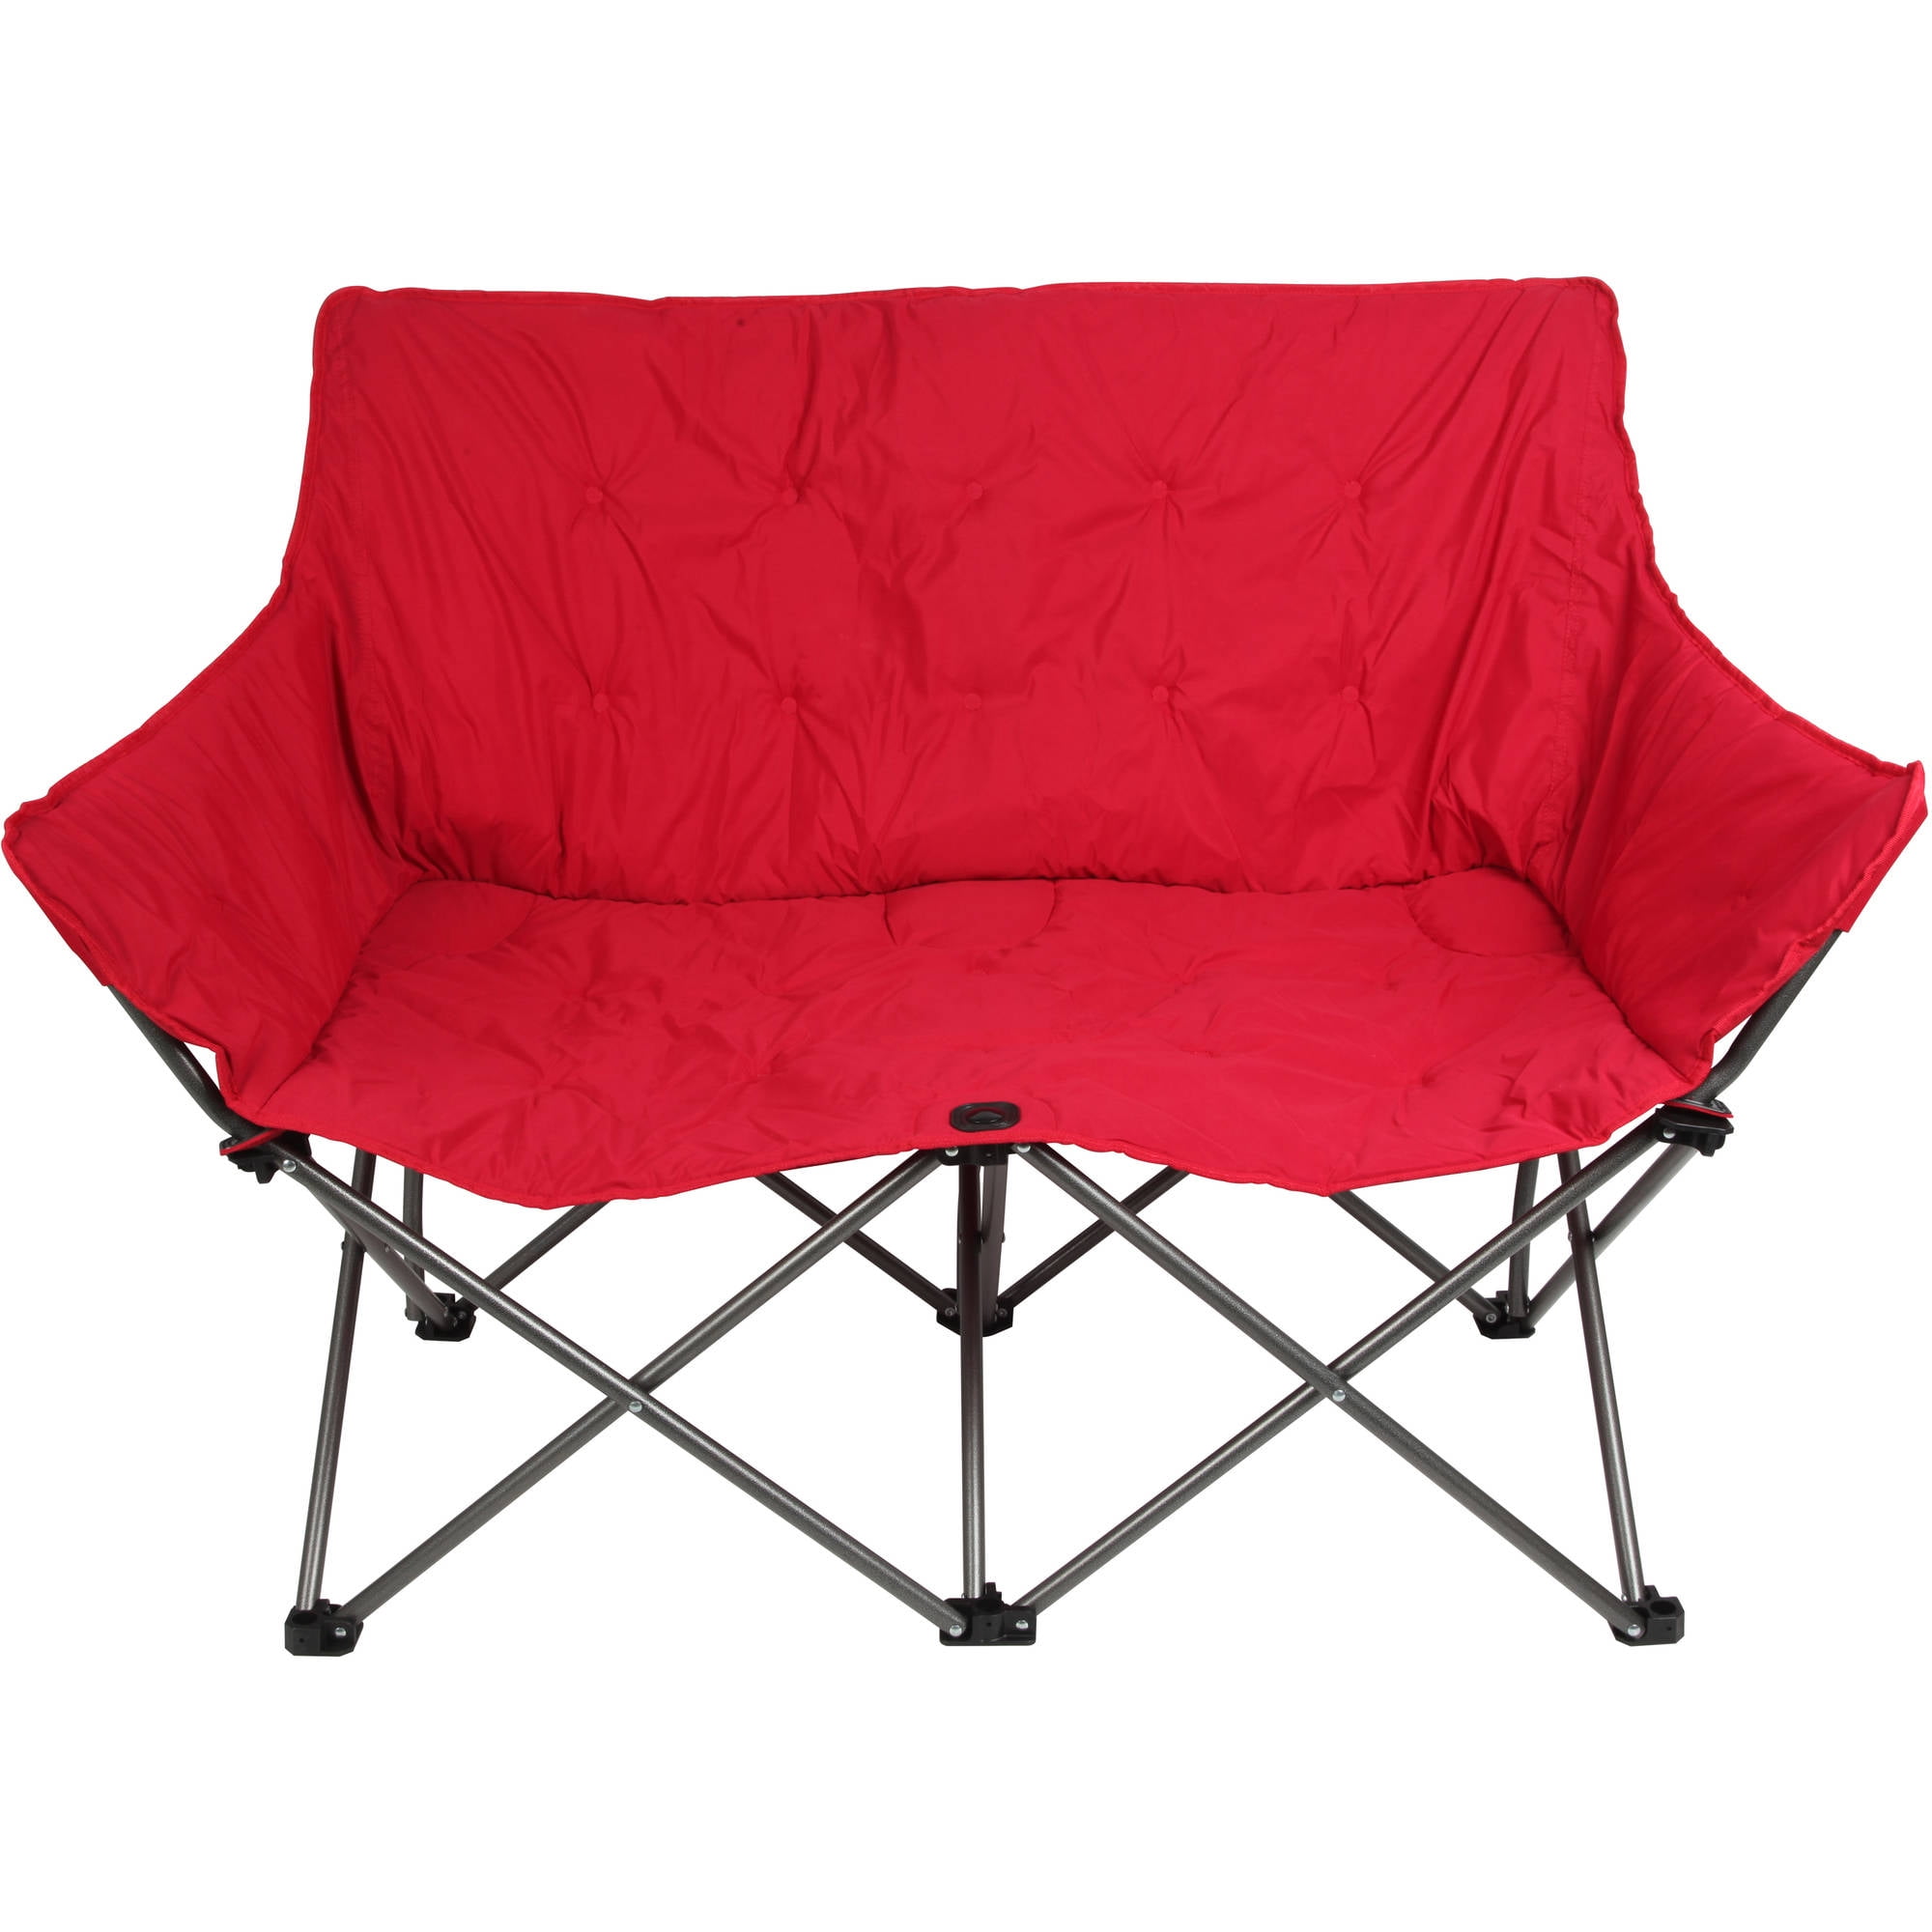 Ozark Trail Camping Love Seat Chair, Red